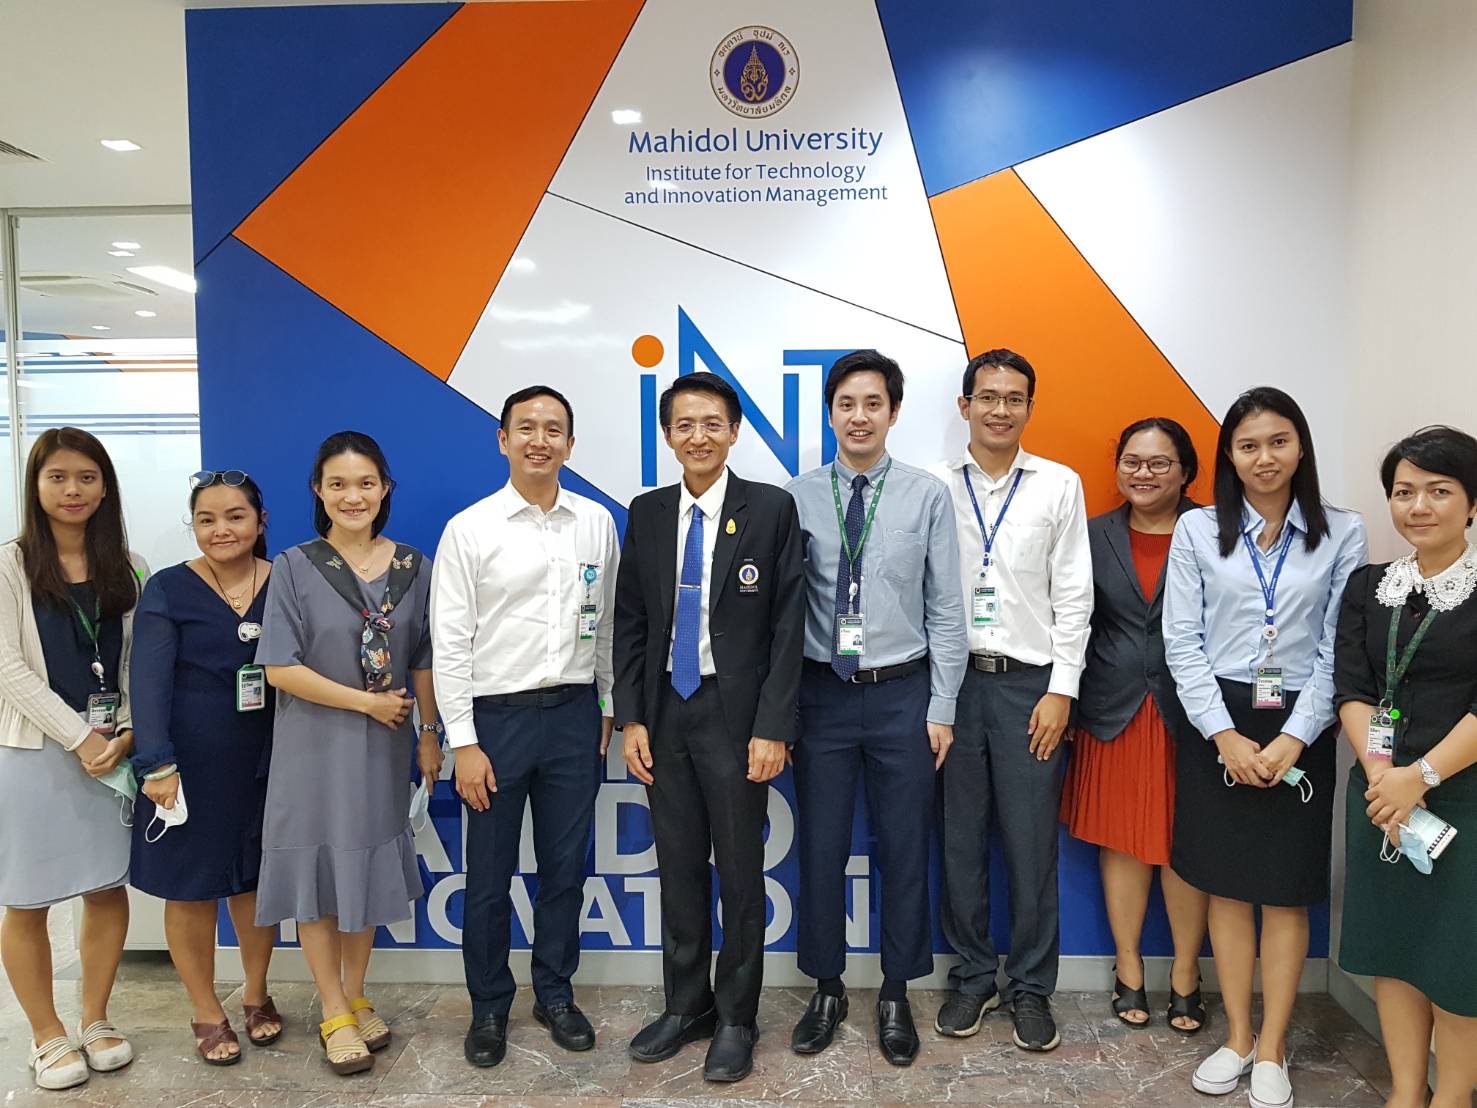 Meeting with Institute for Technology and Innovation Management (iNT), Mahidol University.